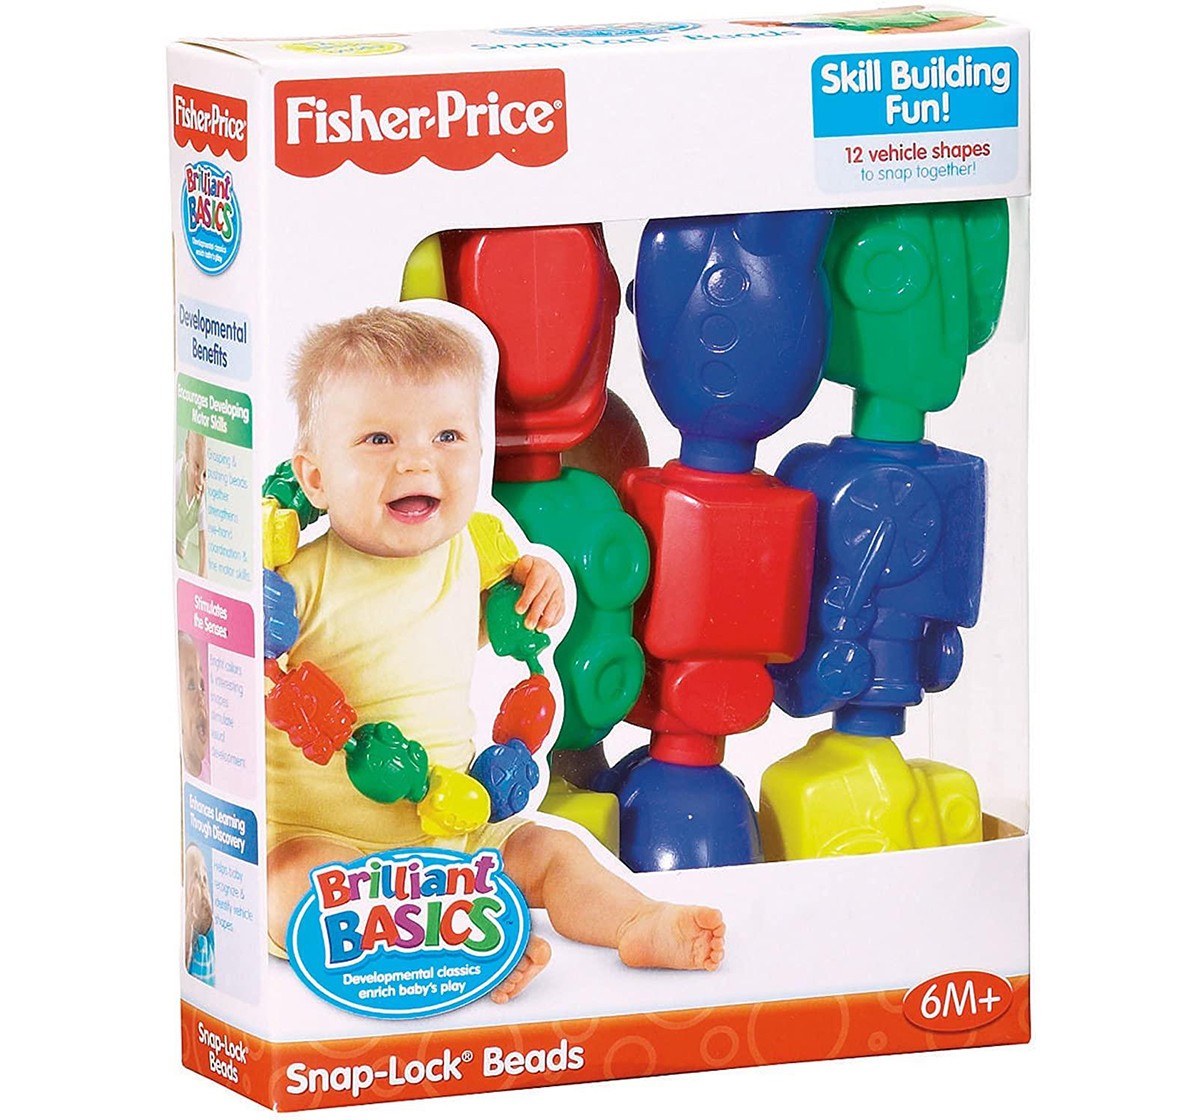 Fisher-Price Snap-Lock Beads Early Learner Toys for Kids age 6M+ 